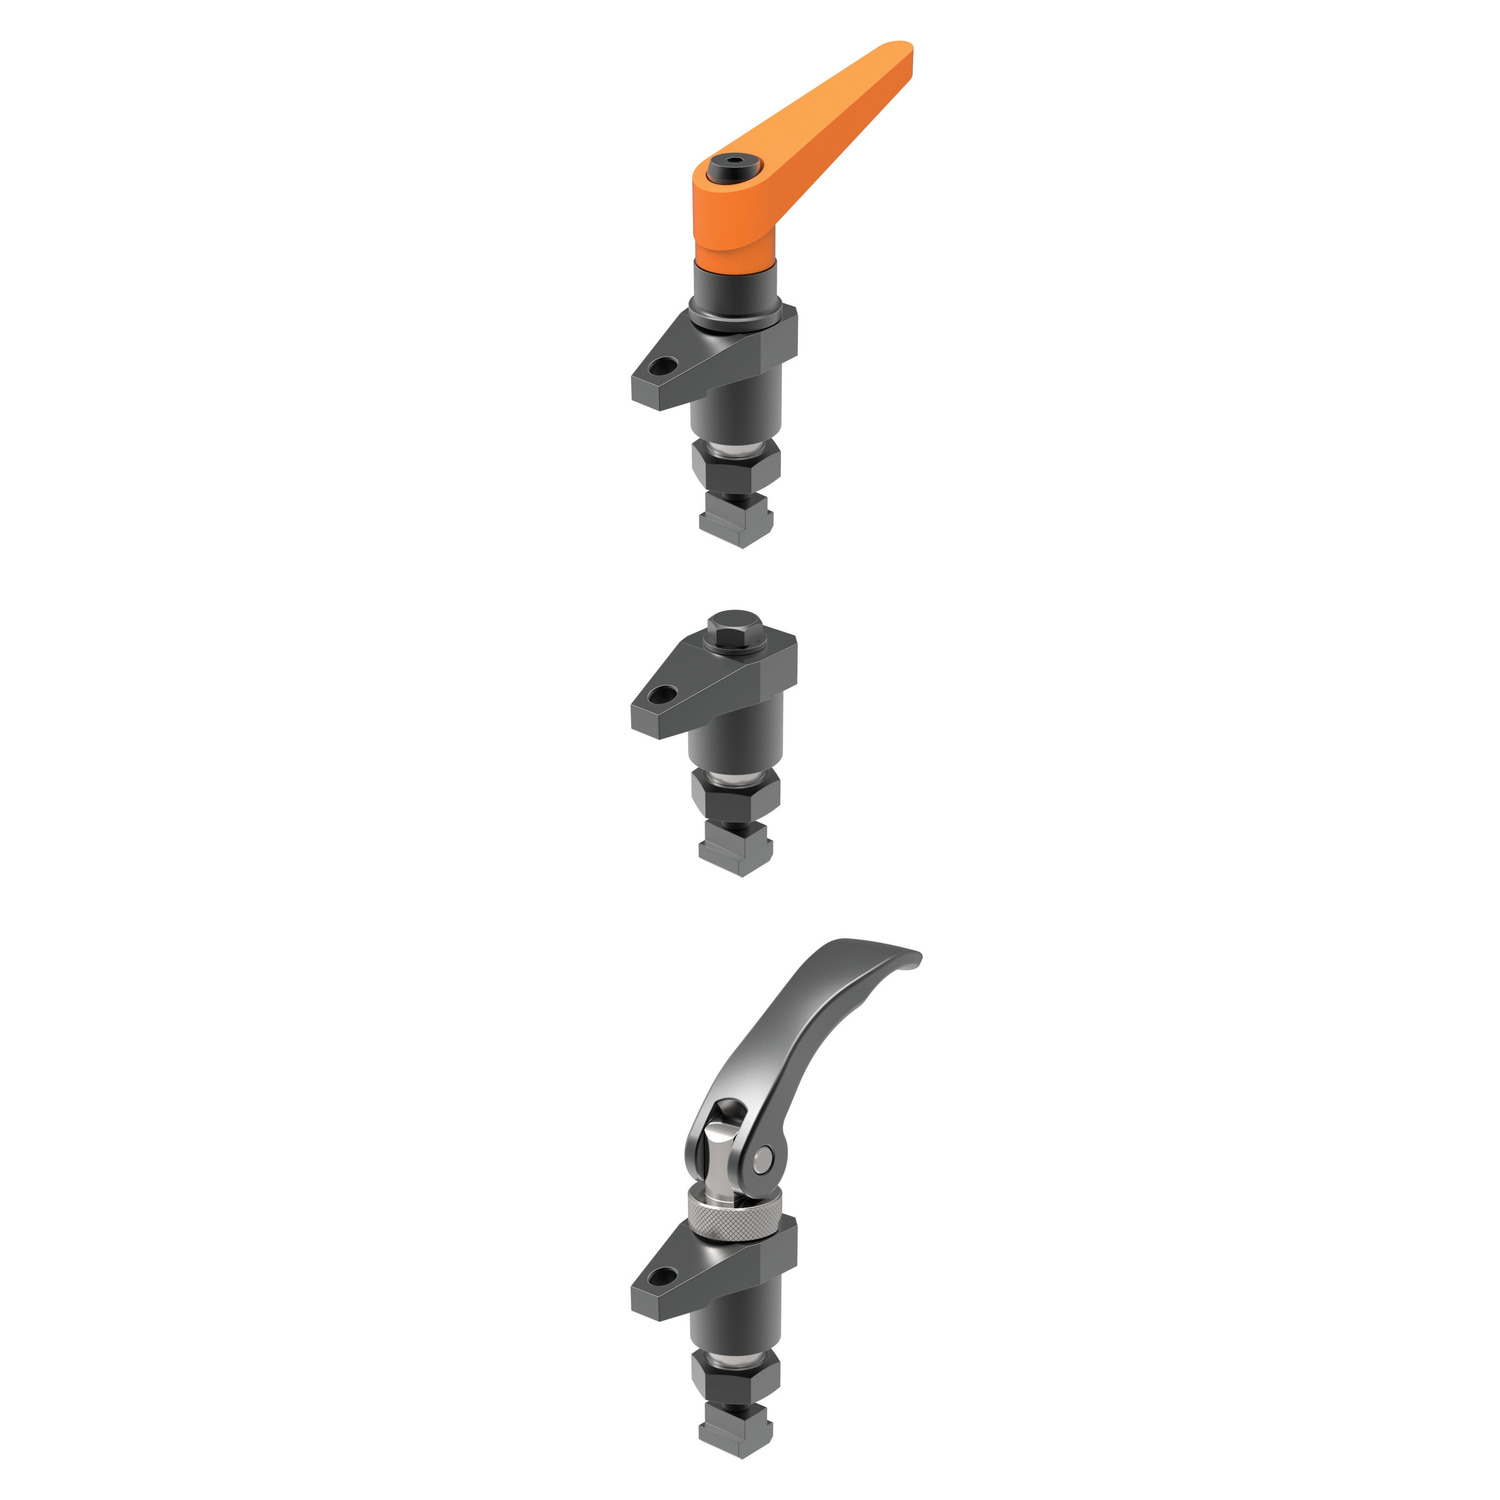 Product 12601, Miniature Down Thrust Clamps swivelling / 